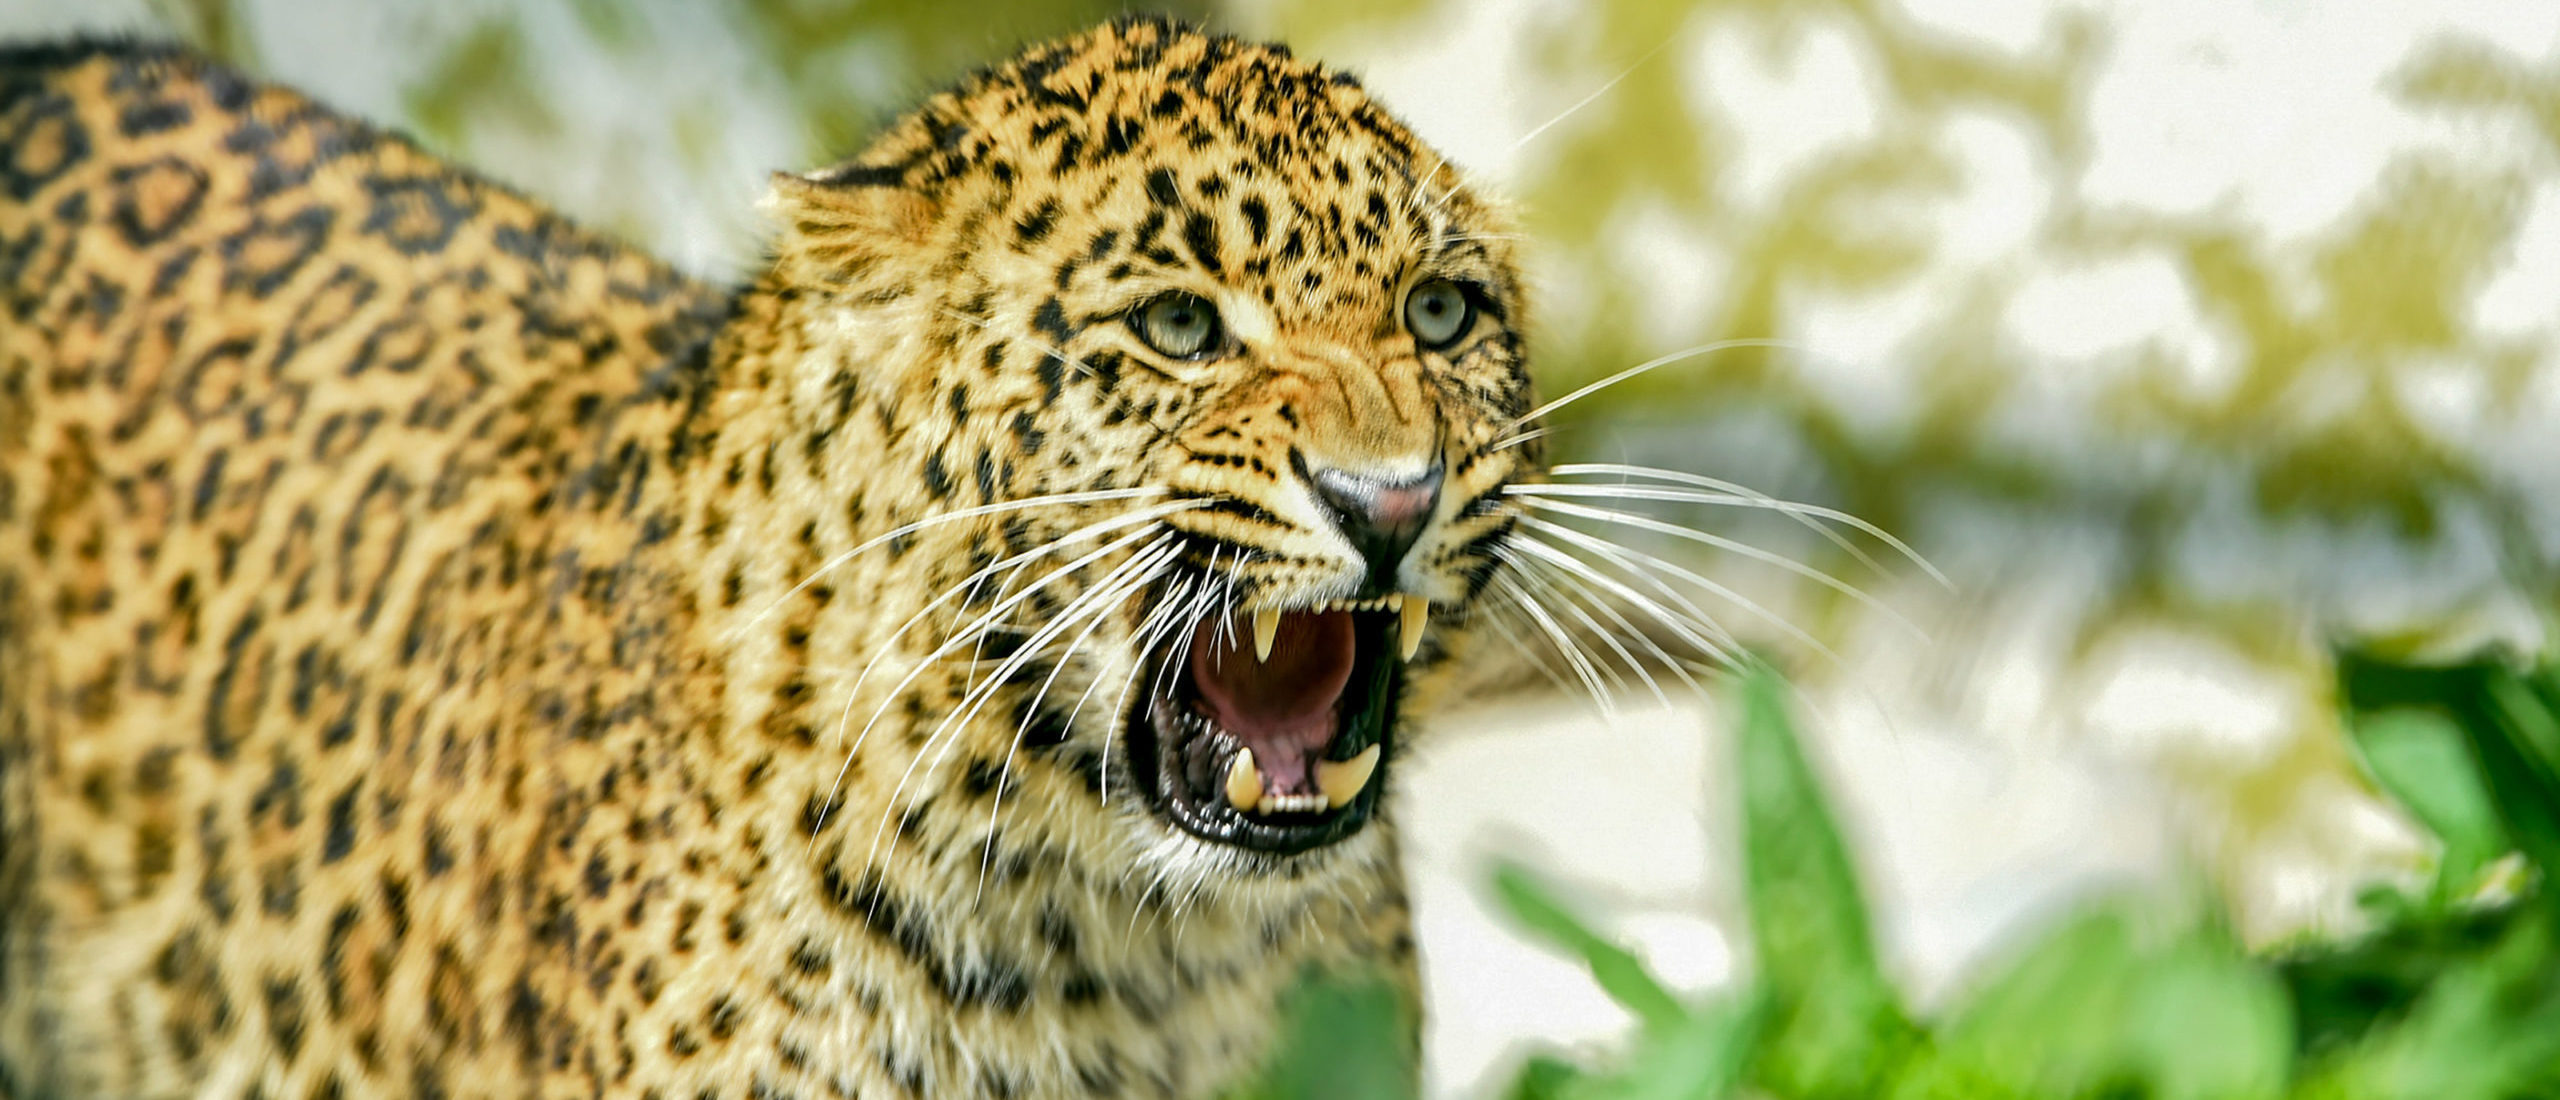 mother-reportedly-runs-after-leopard-saves-child-after-the-animal-snatched-him